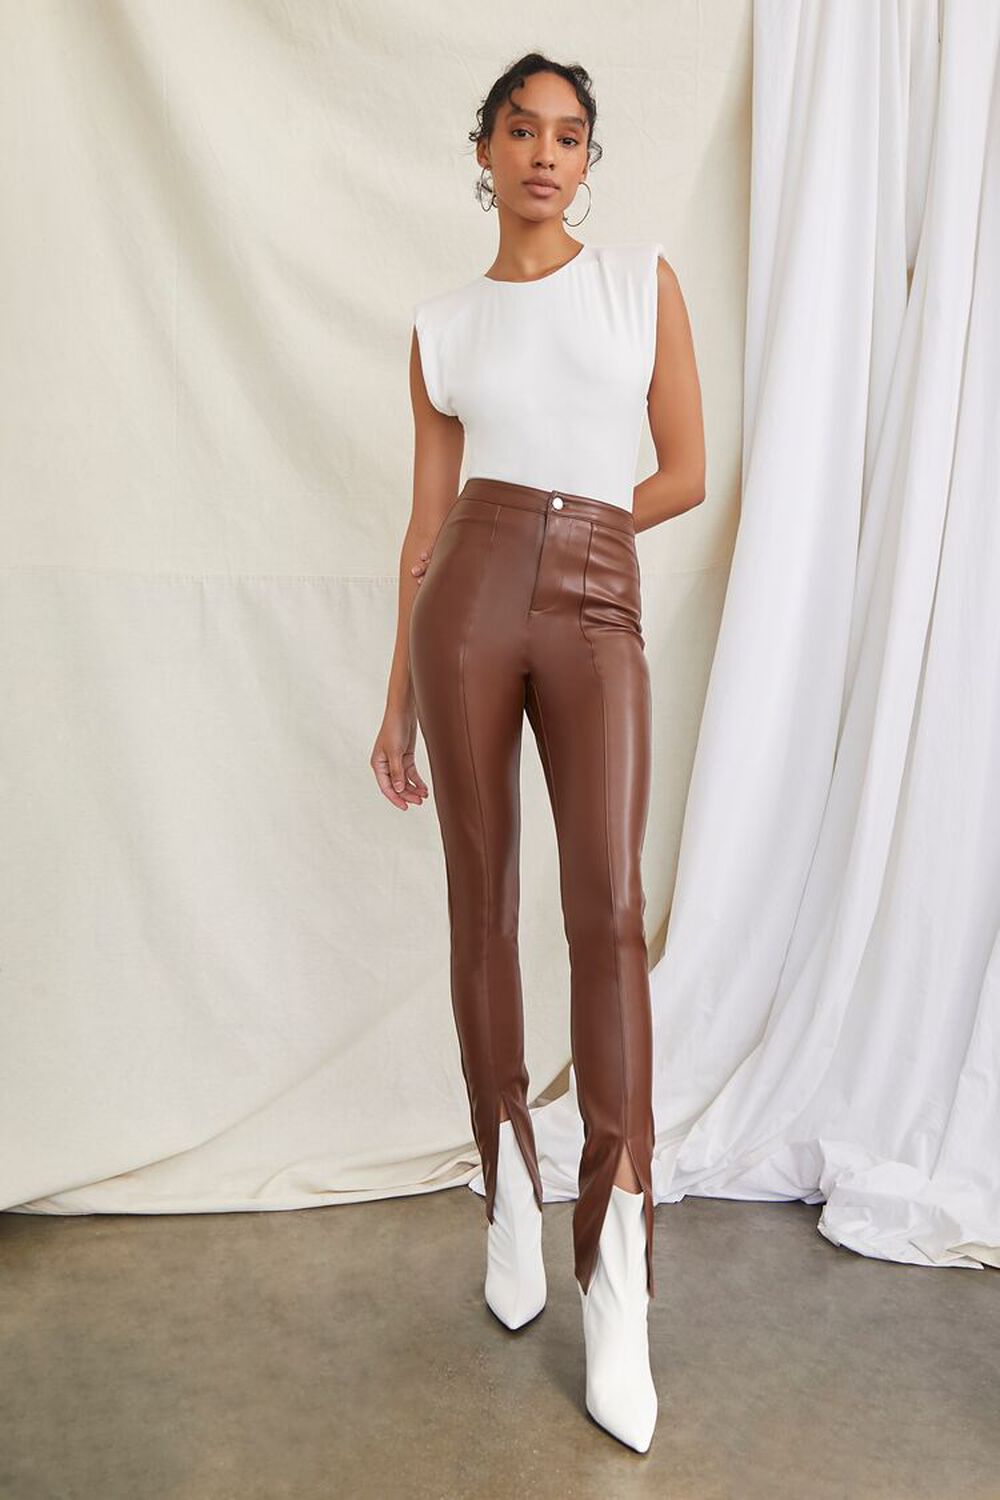 BROWN Faux Leather Skinny Pants, image 1